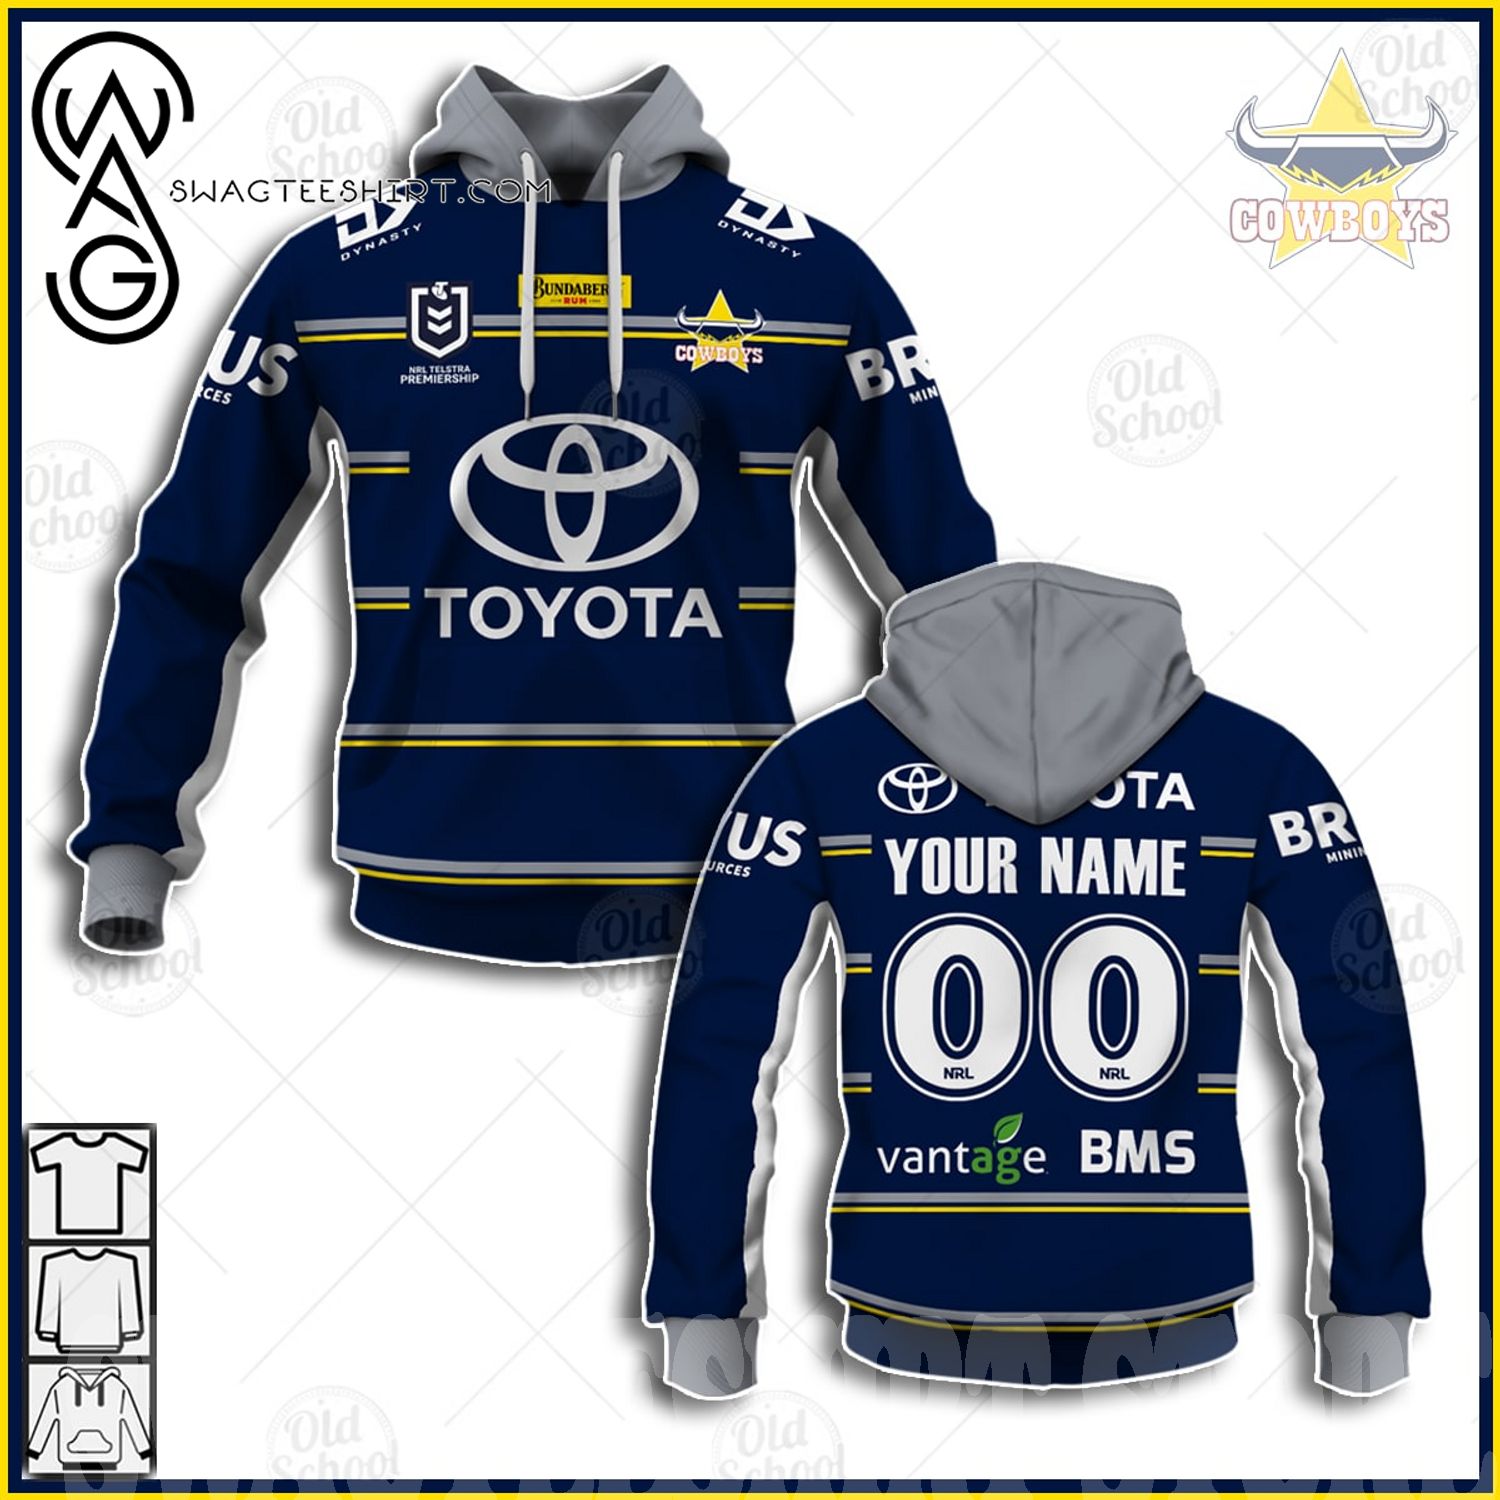 Publiciteit Omgaan Herdenkings High quality] Personalized NRL North Queensland Cowboys Home Jersey 3D All  Over Printed Shirt